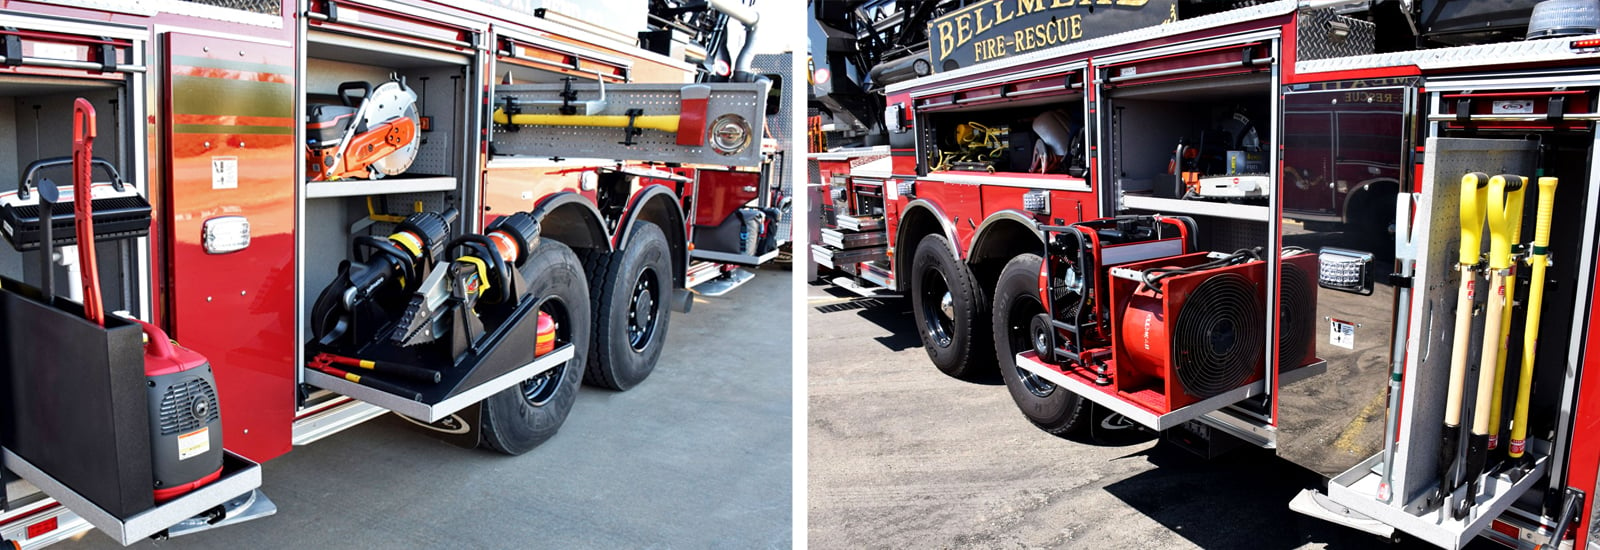 Two images show how peg boards and swing boards can be used to strategically store tools on a fire truck. 